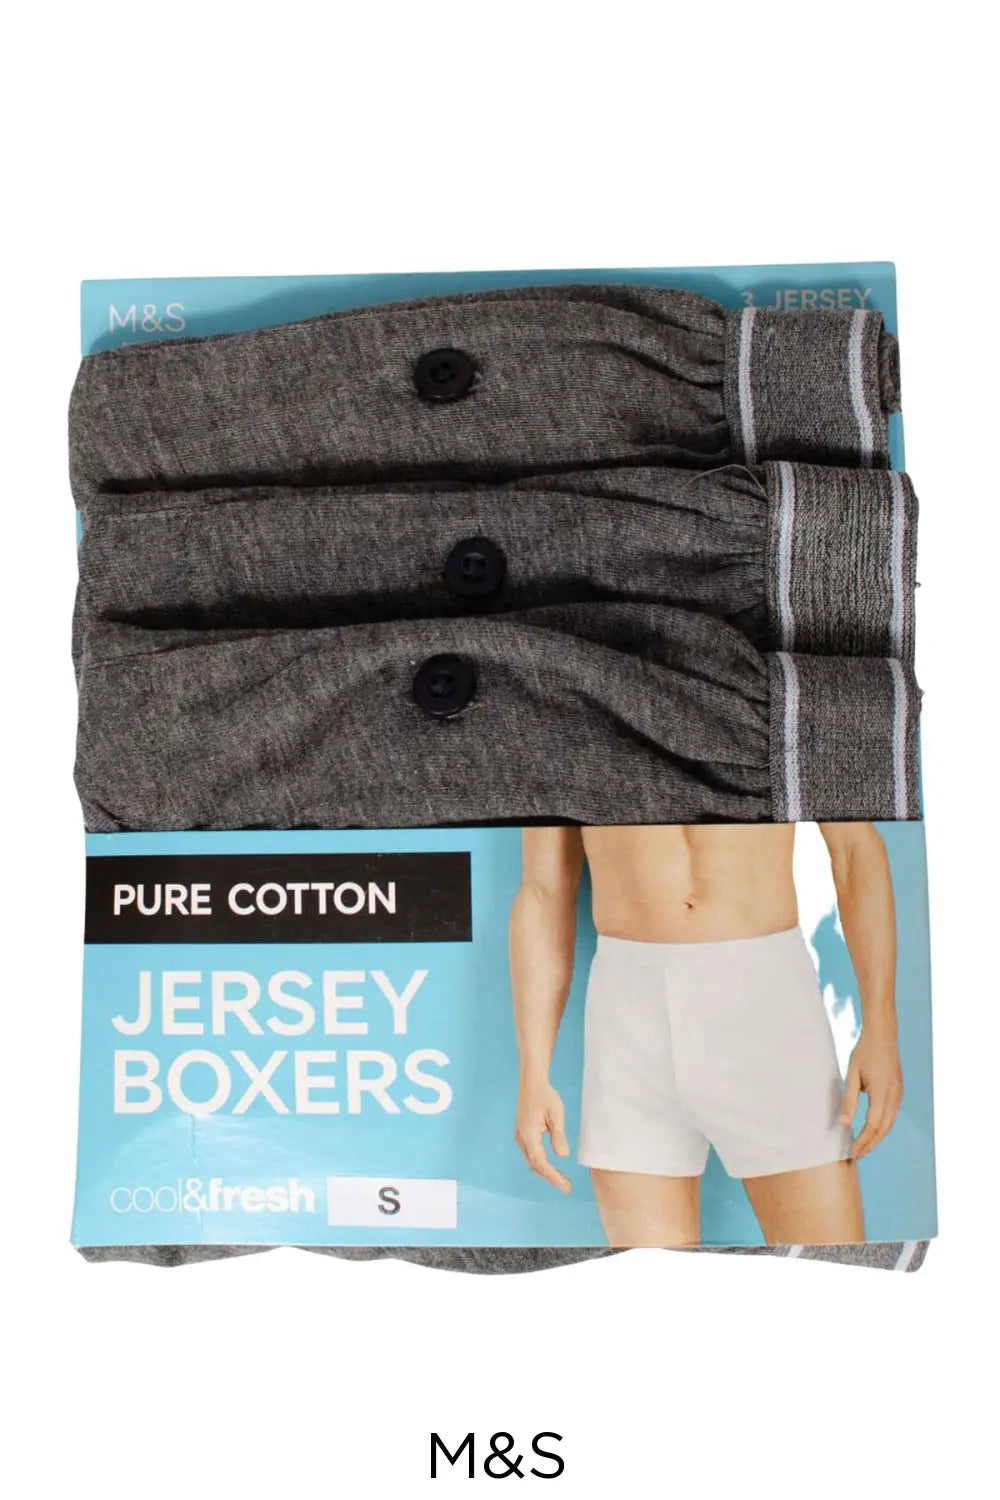 M&S Cotton Jersey Boxers (3 pack) Grey / M